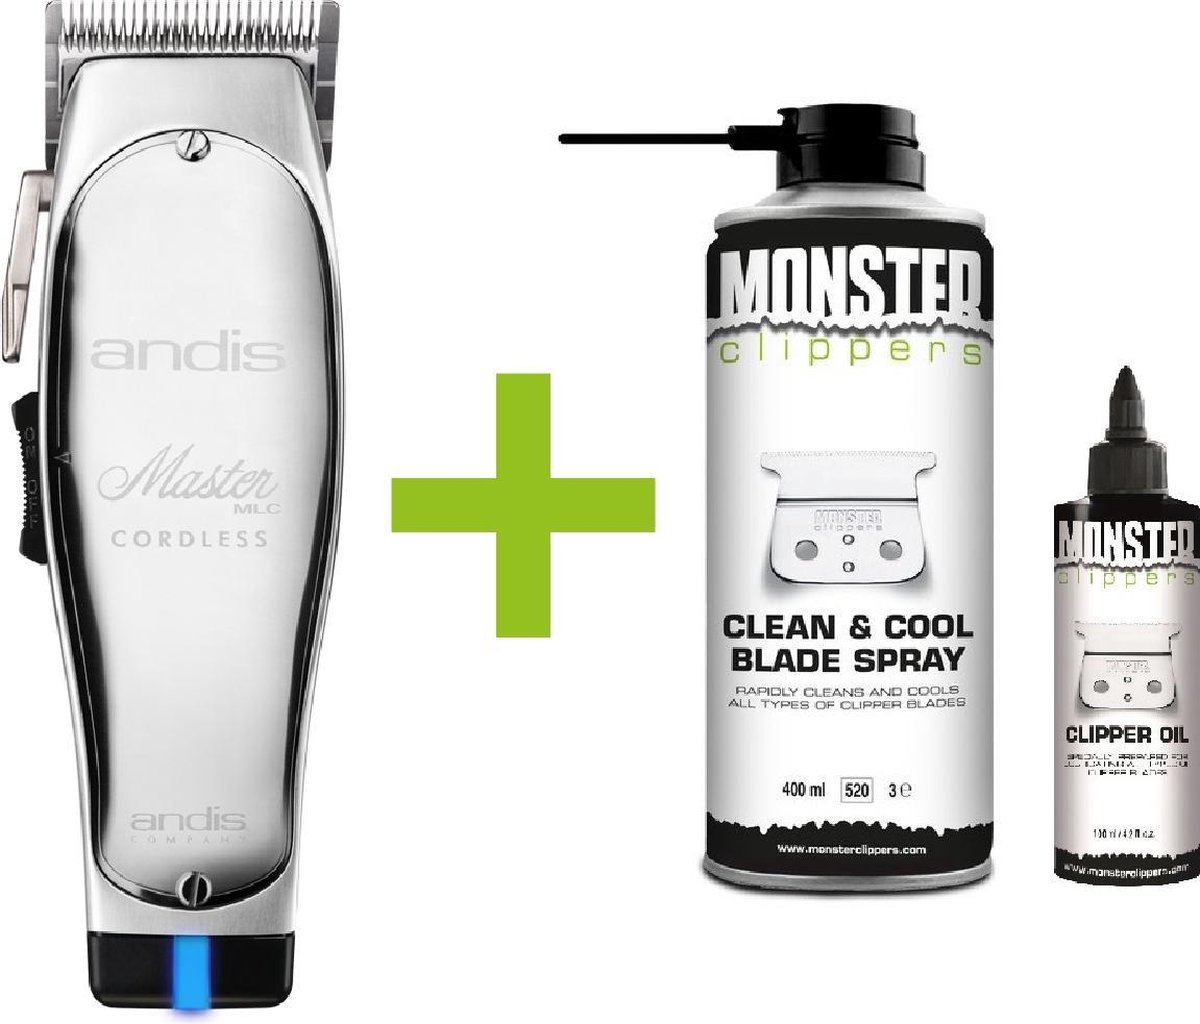 Andis Tondeuse Master Cordless Li Clipper Draadloos + Monster Clippers Clean & Cool Blade Spray